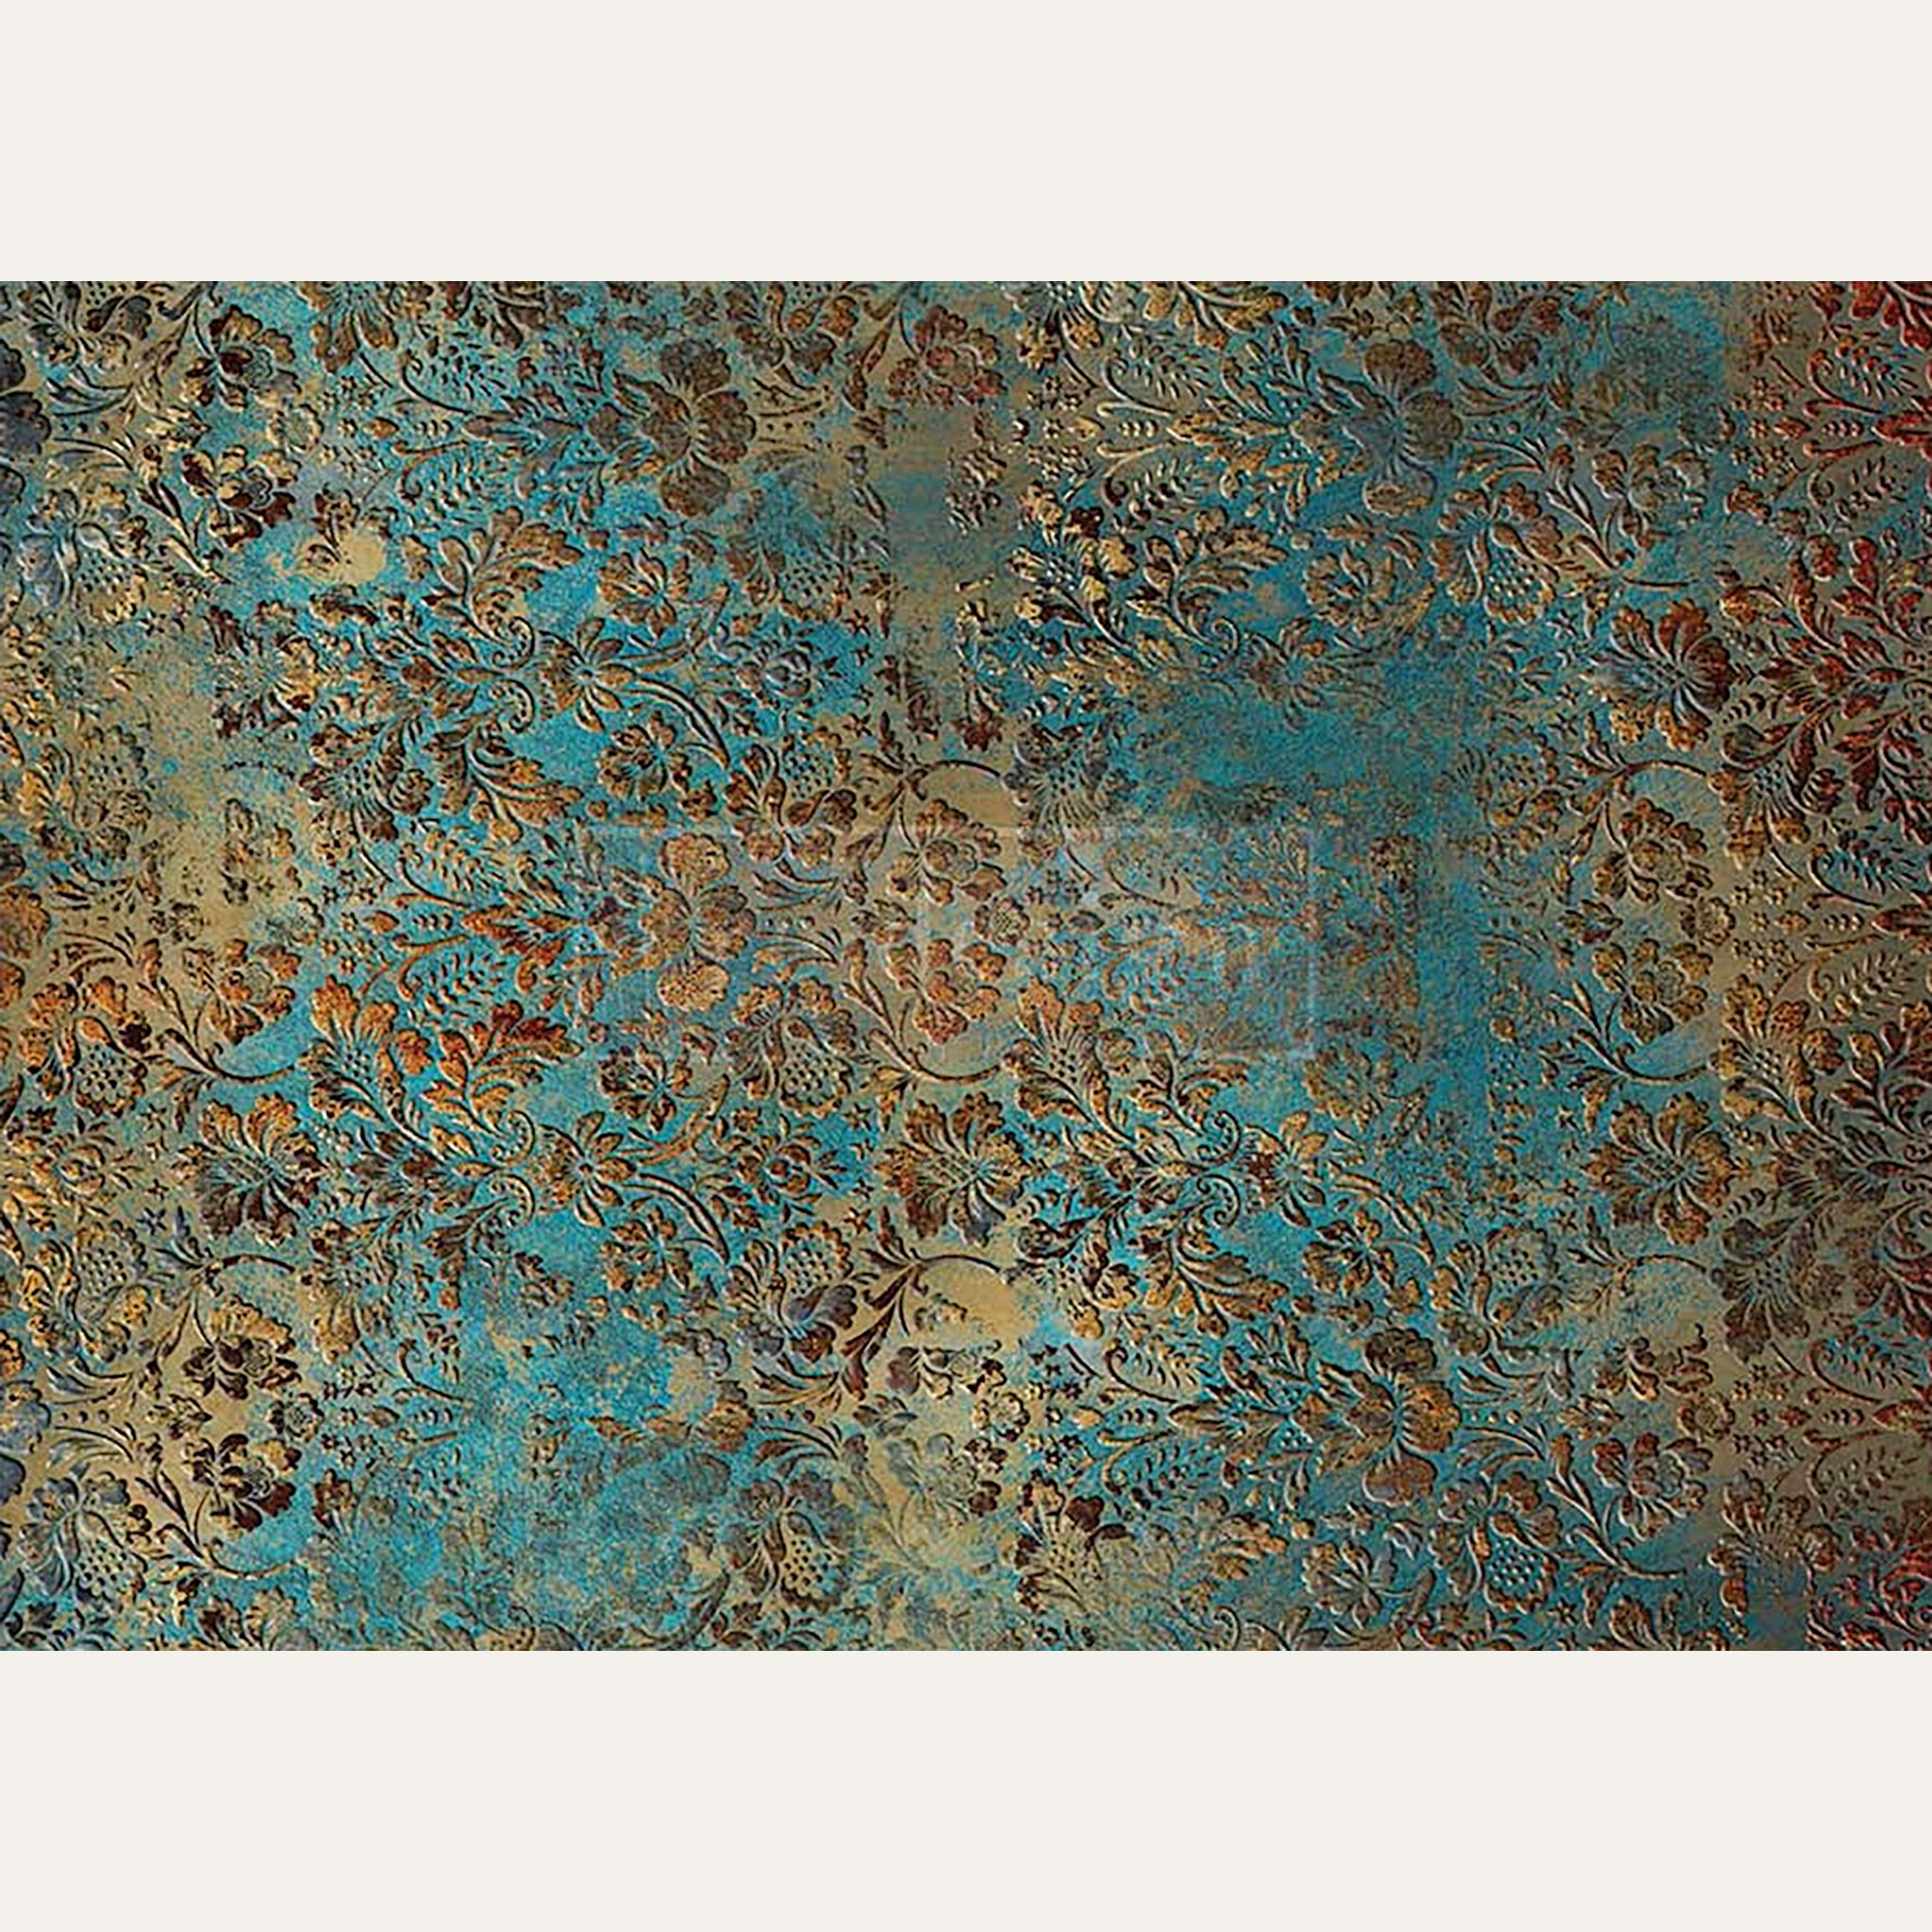 A1 fiber paper design of an aged floral patina. White borders are on the top and bottom.